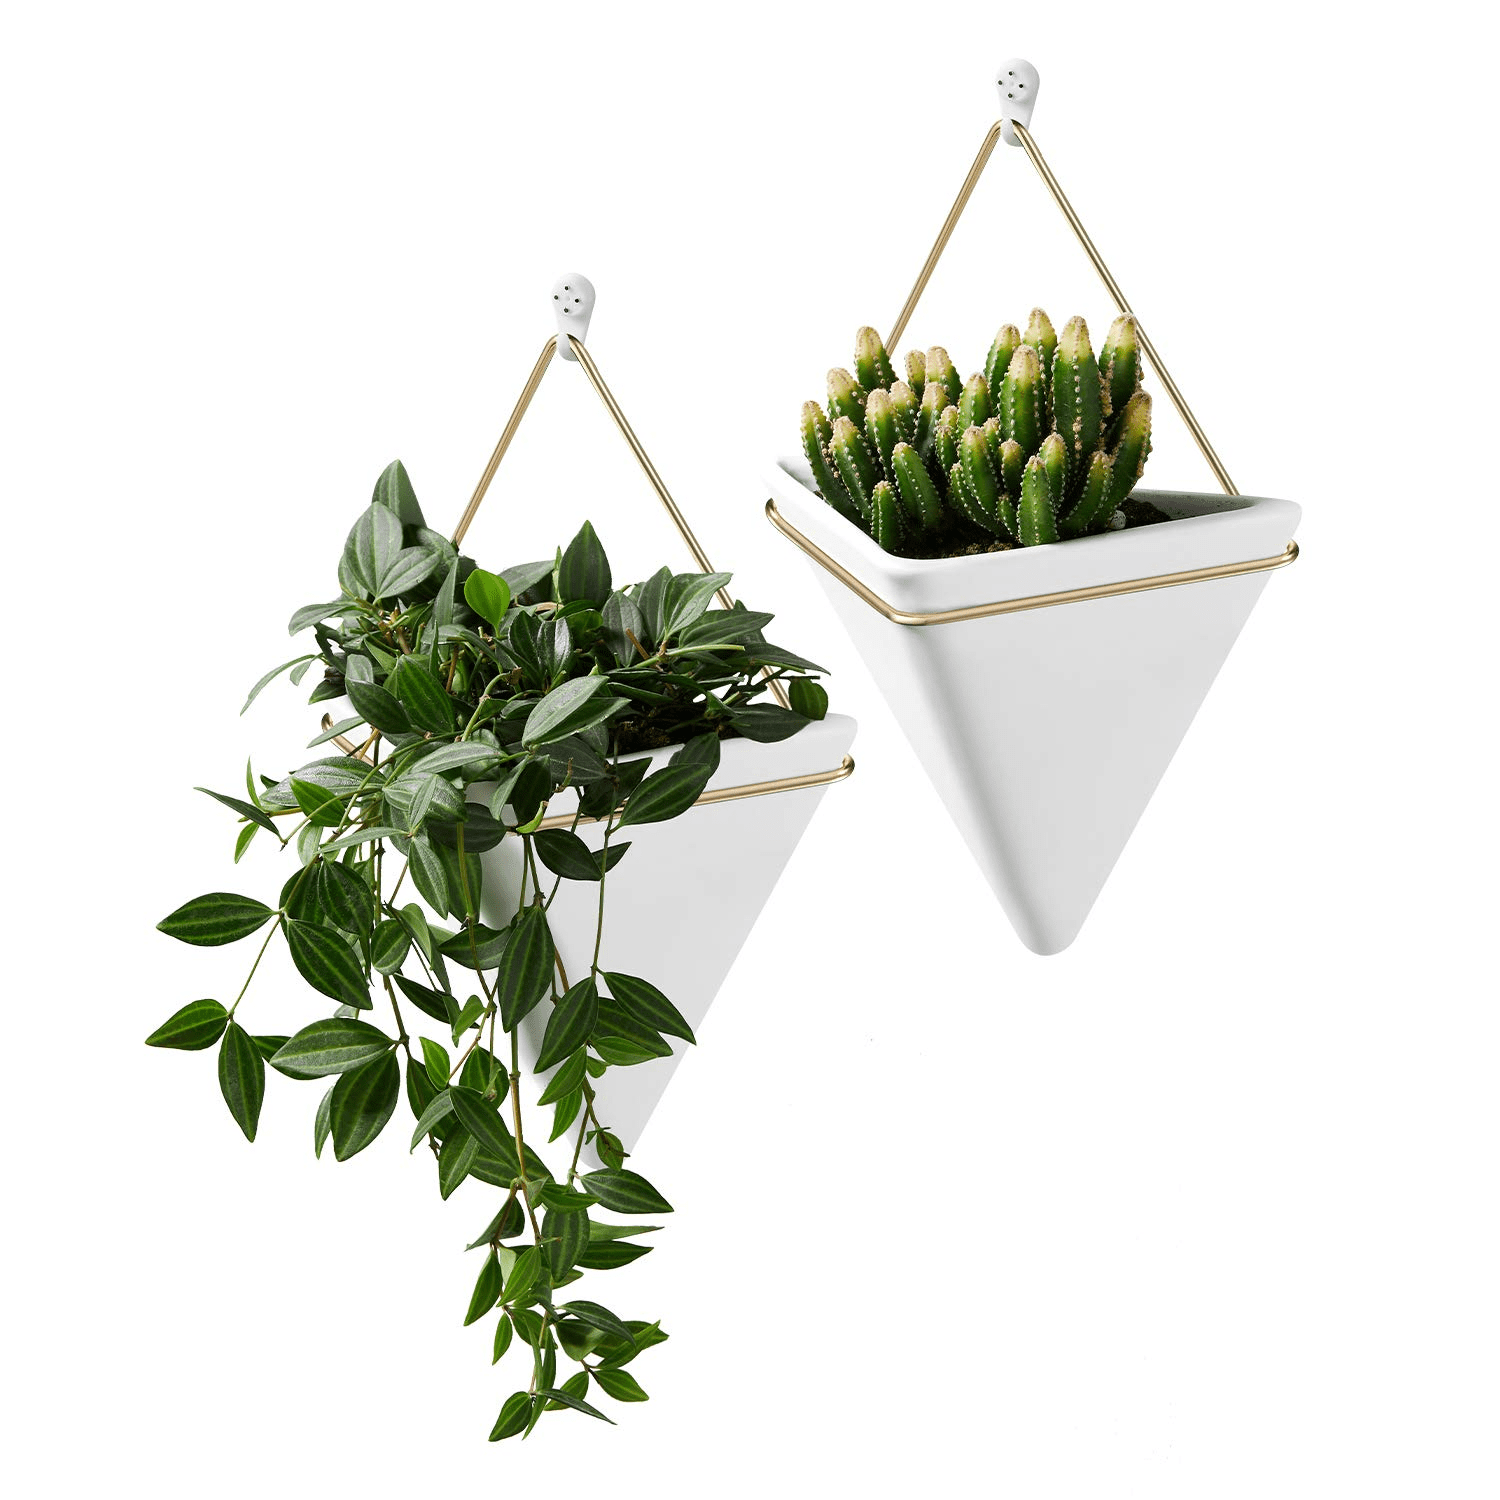 Cactus Air Faux Plants Indoor Wall Decor Home Gift Black Wall Planter Set fo 2,Wall Decor Geometric Planter Hanging Plant for Home Succulent 